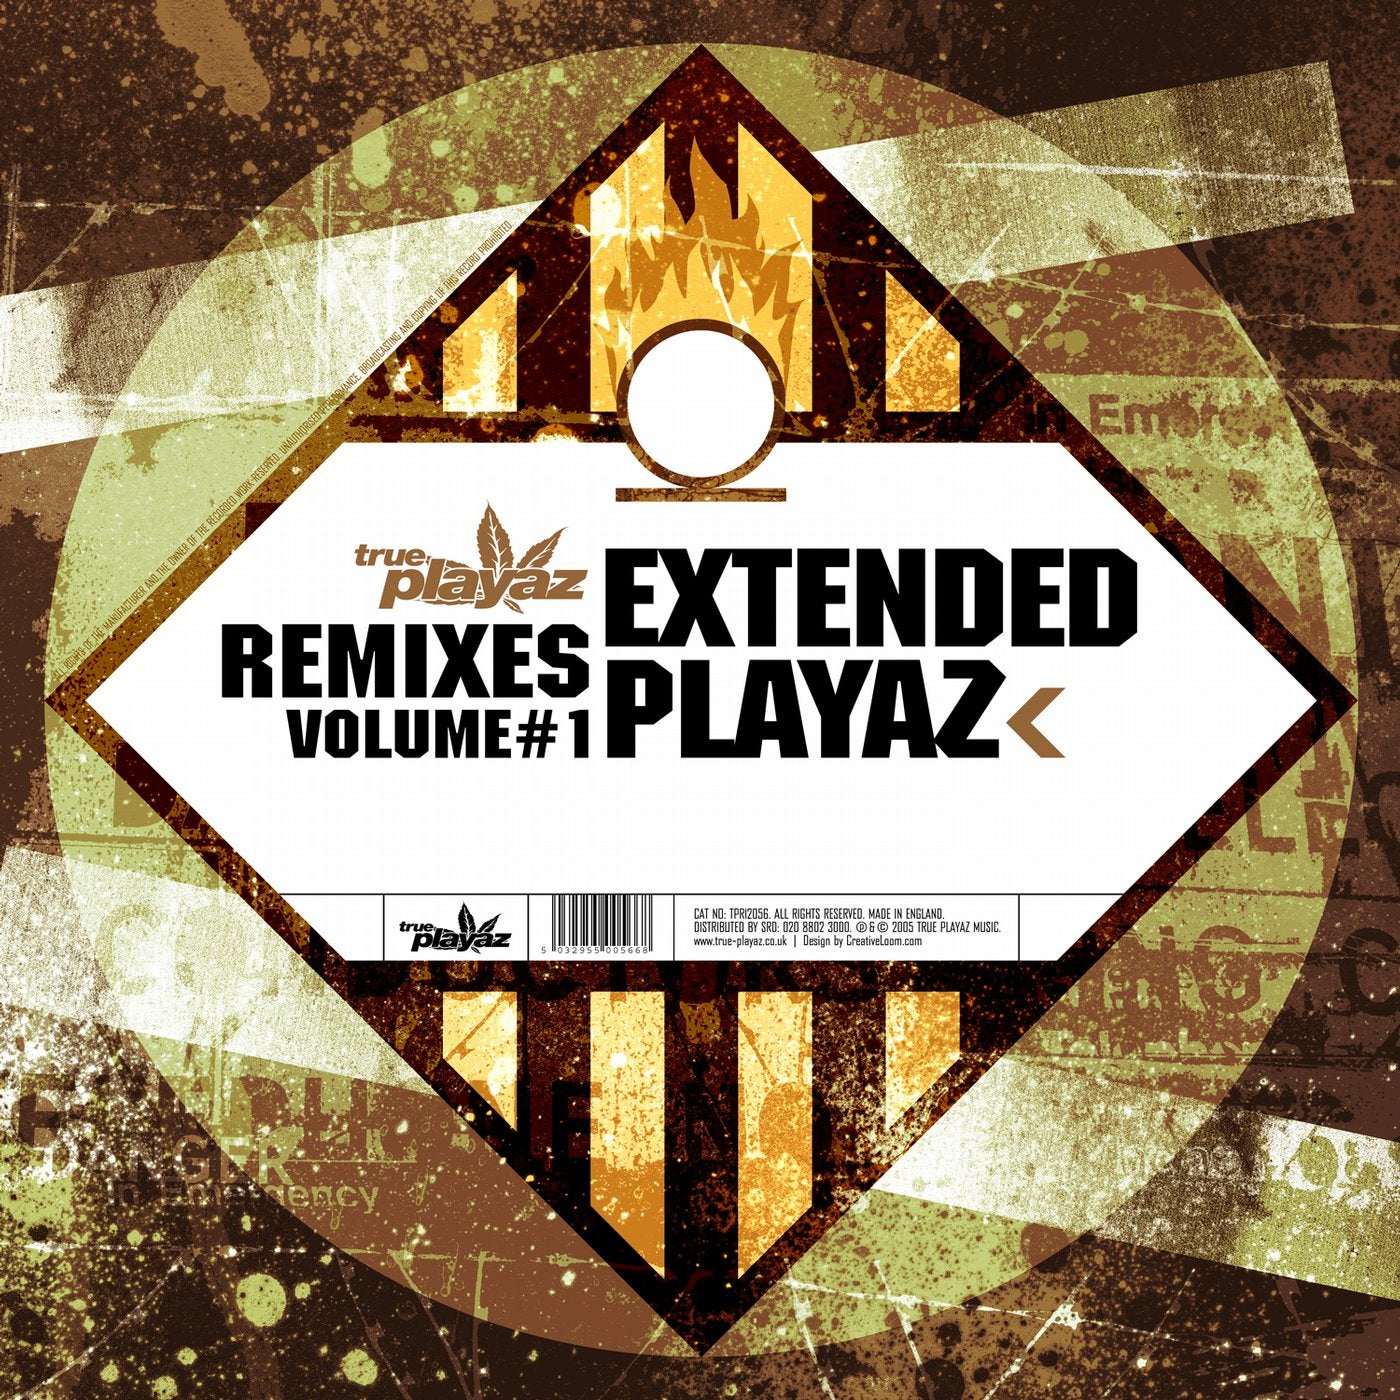 Extended Playaz R1